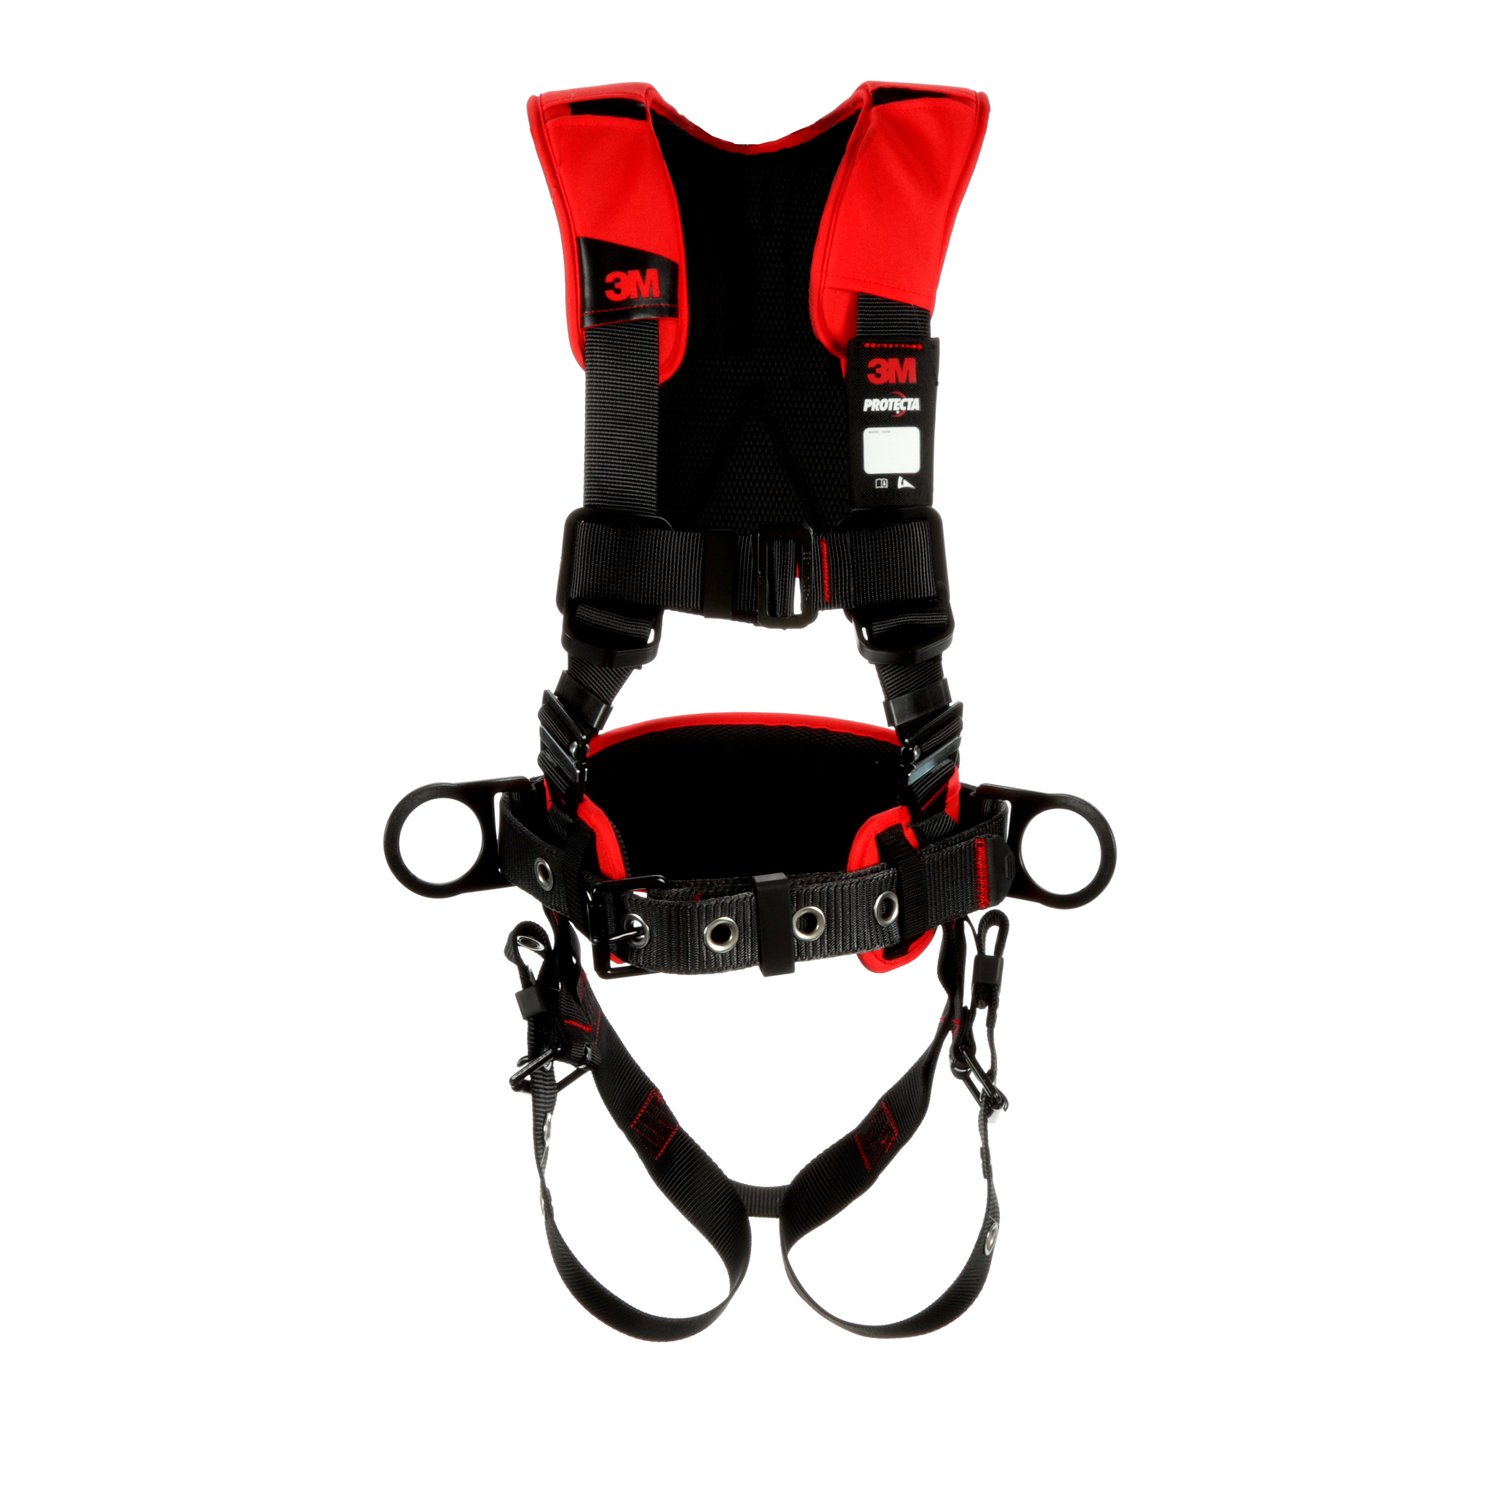 7100232014 - 3M Protecta P200 Comfort Construction Positioning Safety Harness
1161207, X-Large